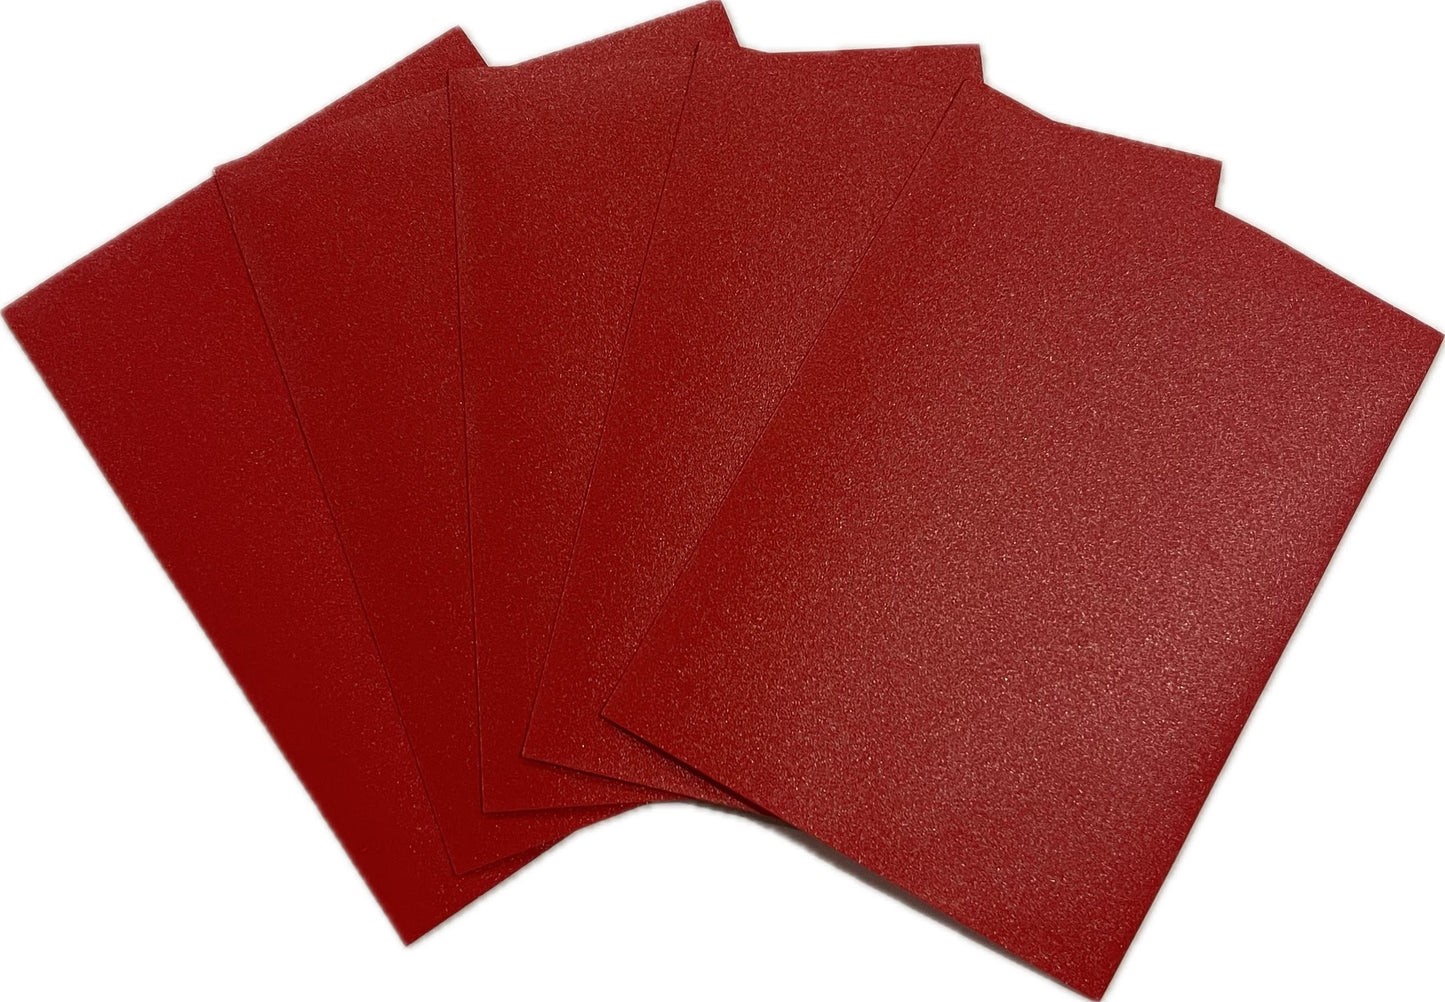 Standard Size Card Sleeves - Red - 200 Count - 66 x 91mm